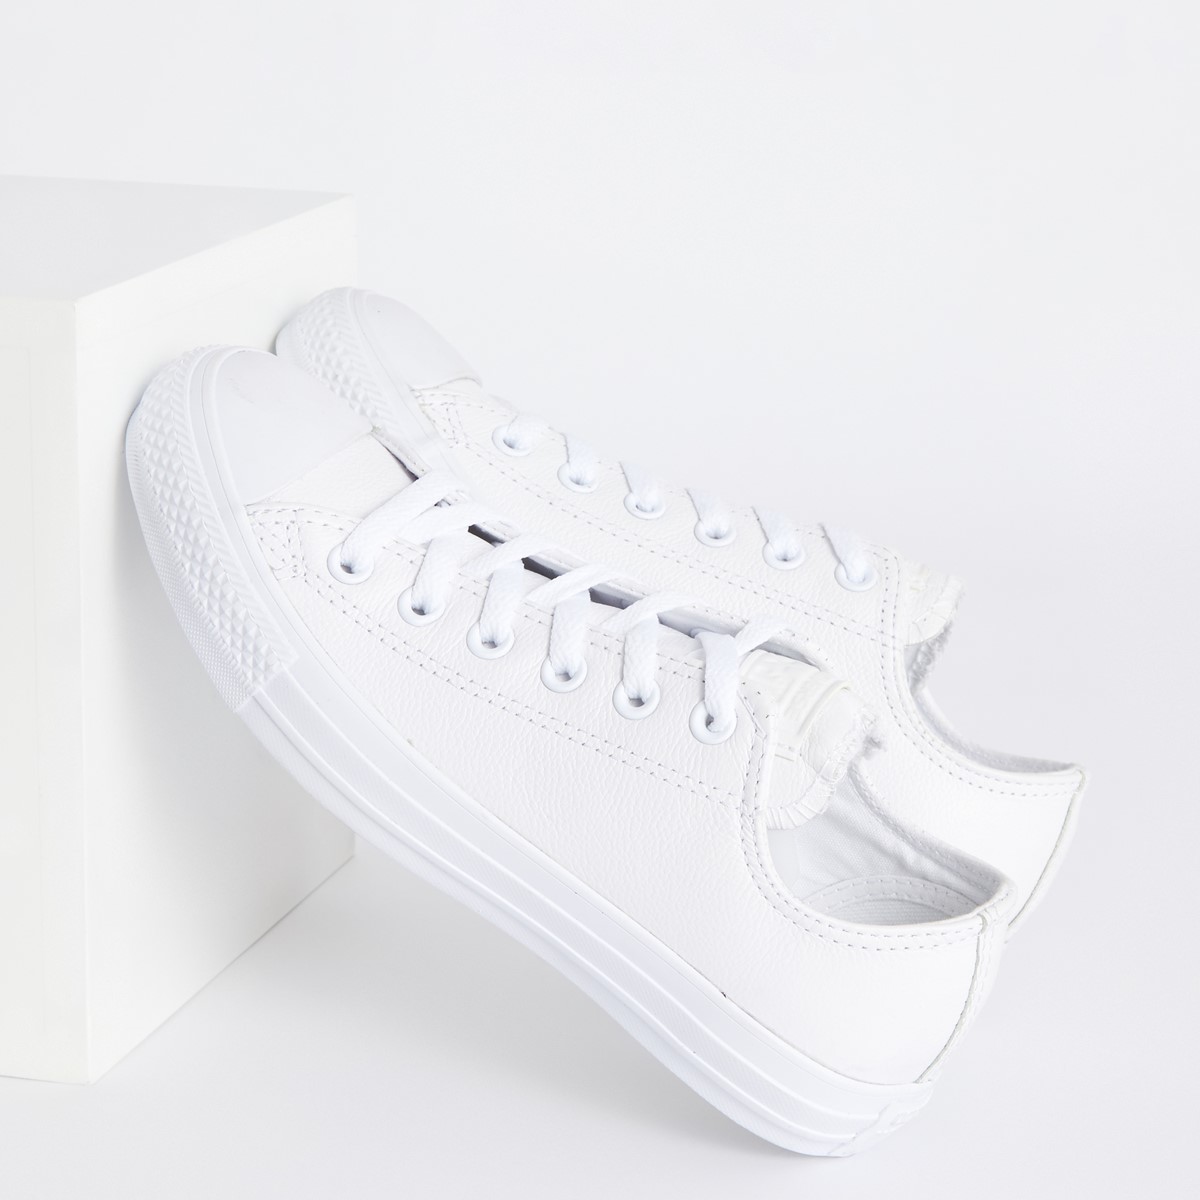 white leather converse mid tops